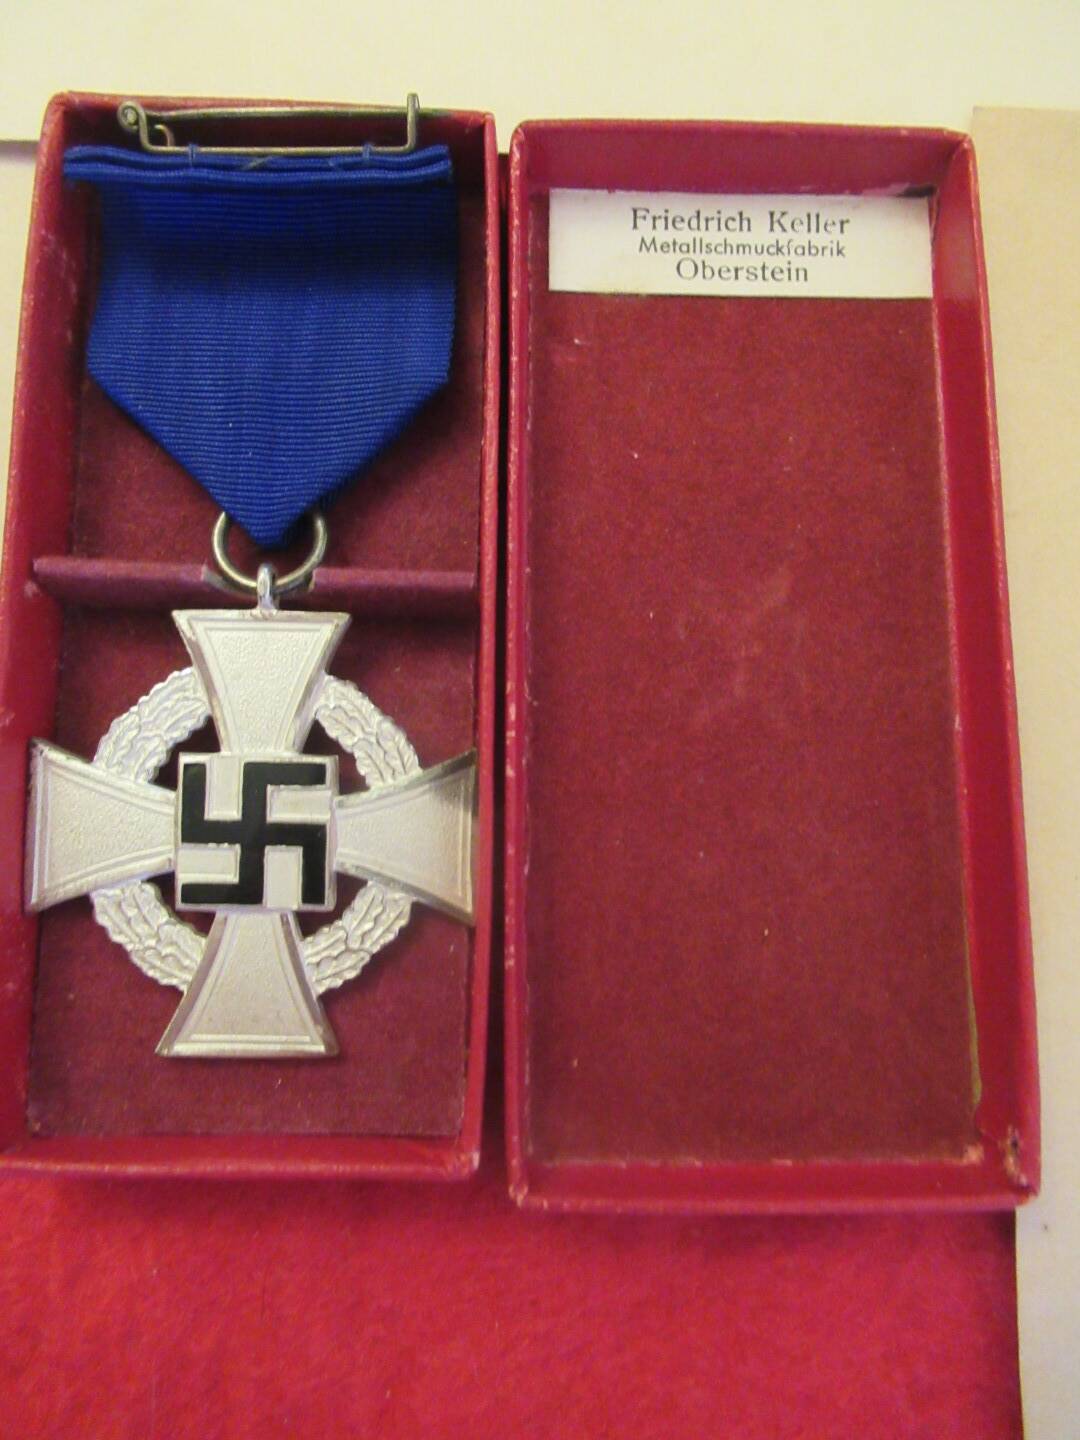 25 years of service boxed medal with 4 award documents